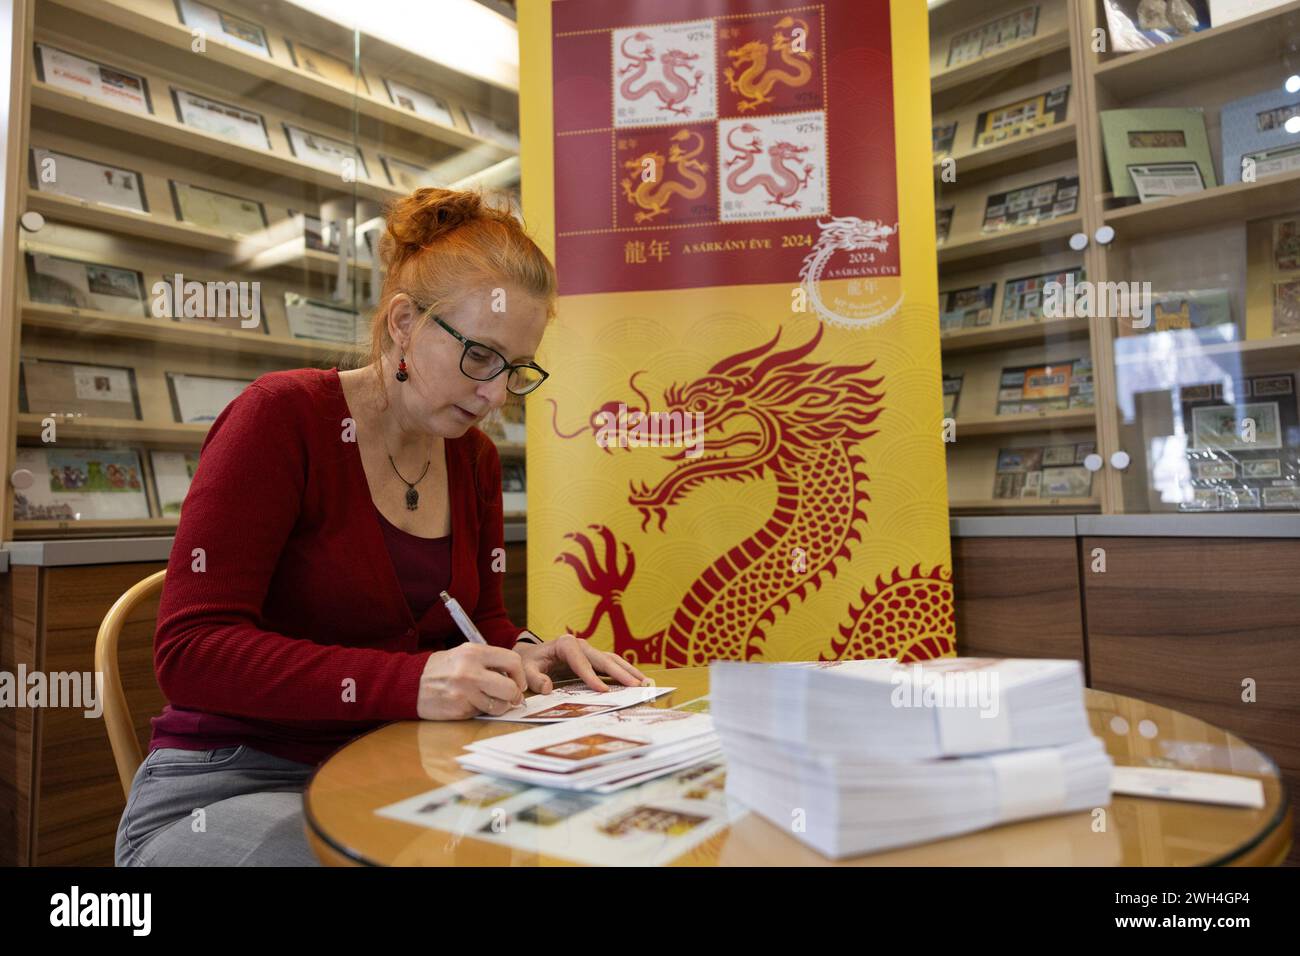 Budapest, Hungary. 7th Feb, 2024. Katalin Bodi, the Hungarian designer of the Year of the Dragon commemorative stamp recently issued by the Hungarian Post, signs on a first-day cover with the stamps of the Year of the Dragon in Budapest, Hungary, on Feb. 7, 2024. Katalin Bodi said she hoped her work could help deepen the connection between Hungary and China. Credit: Attila Volgyi/Xinhua/Alamy Live News Stock Photo